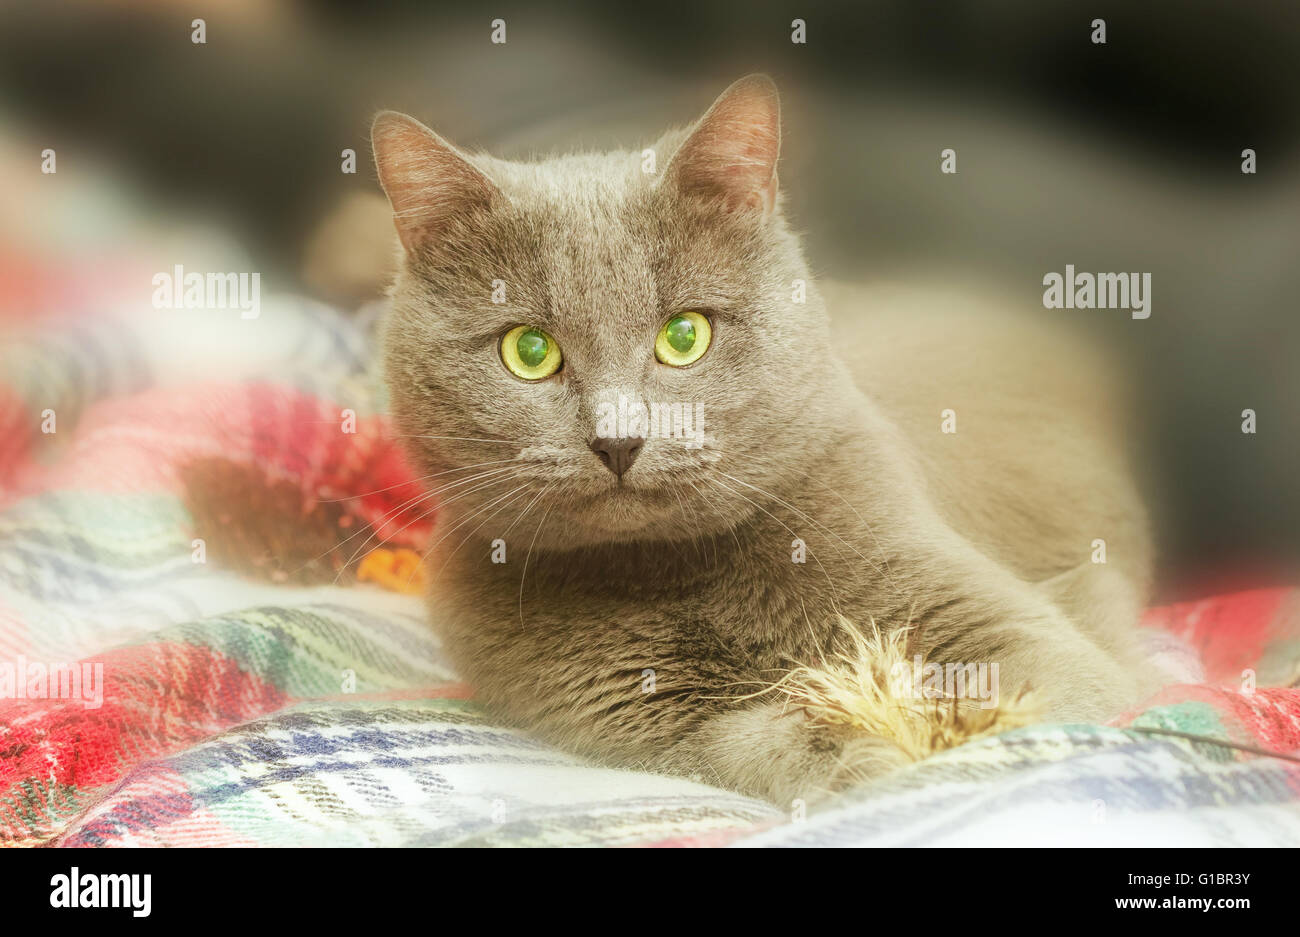 Nice gray cat with toy on plaid blanket Stock Photo